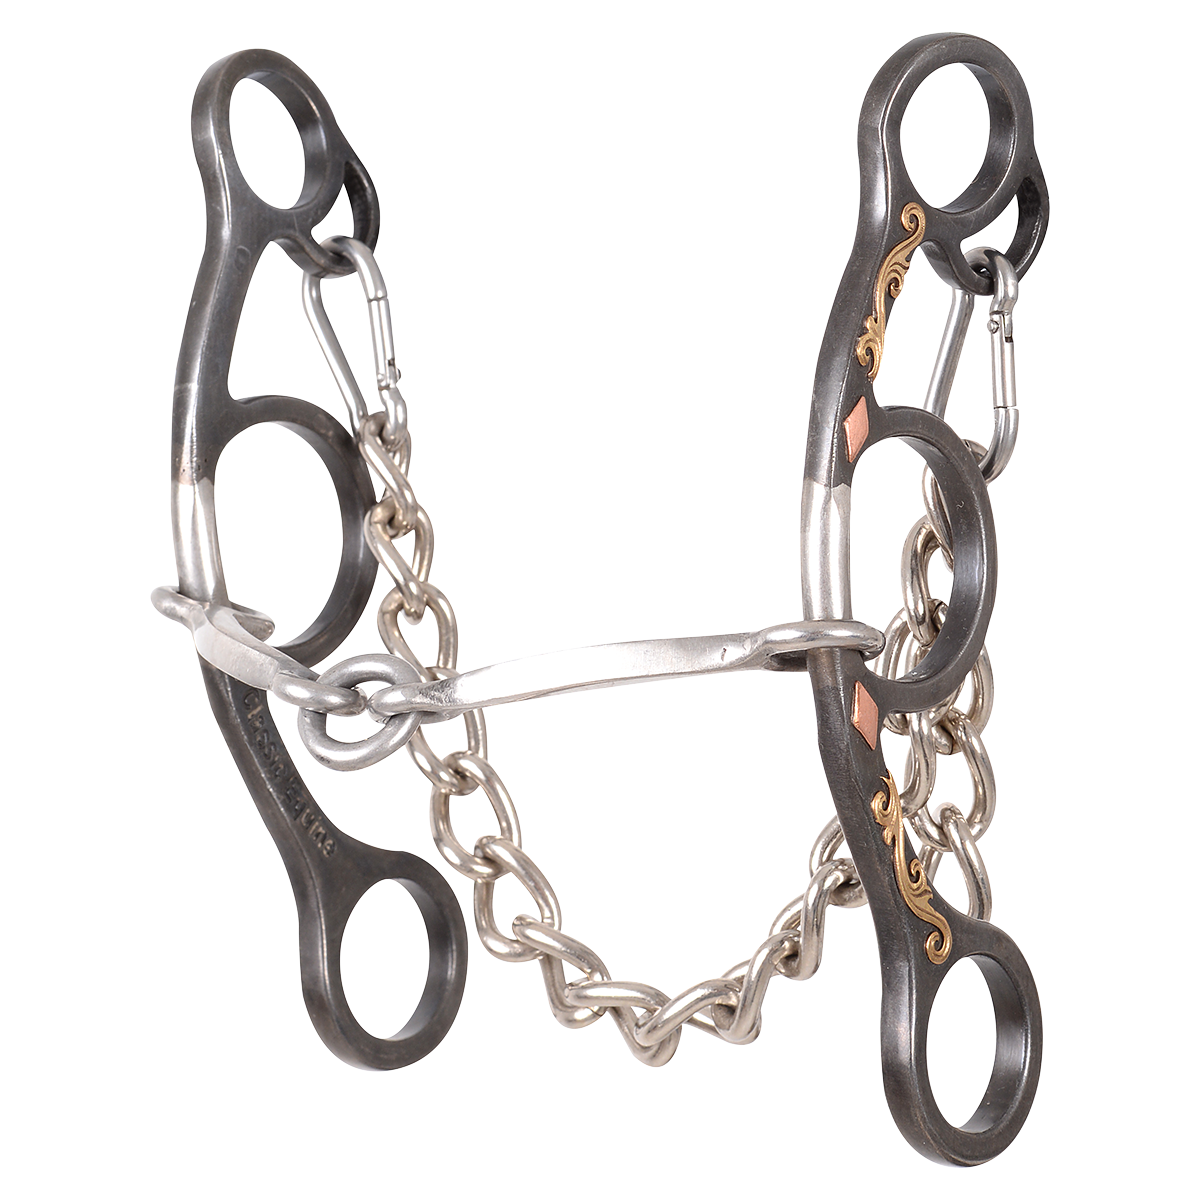 Horse Bit Horse Mouth Bit Horse Bridle Harness Loose Rings Snaffle O Rings  All Purpose with Trims Training Equipment Rings Snaffle Bits - Walmart.com